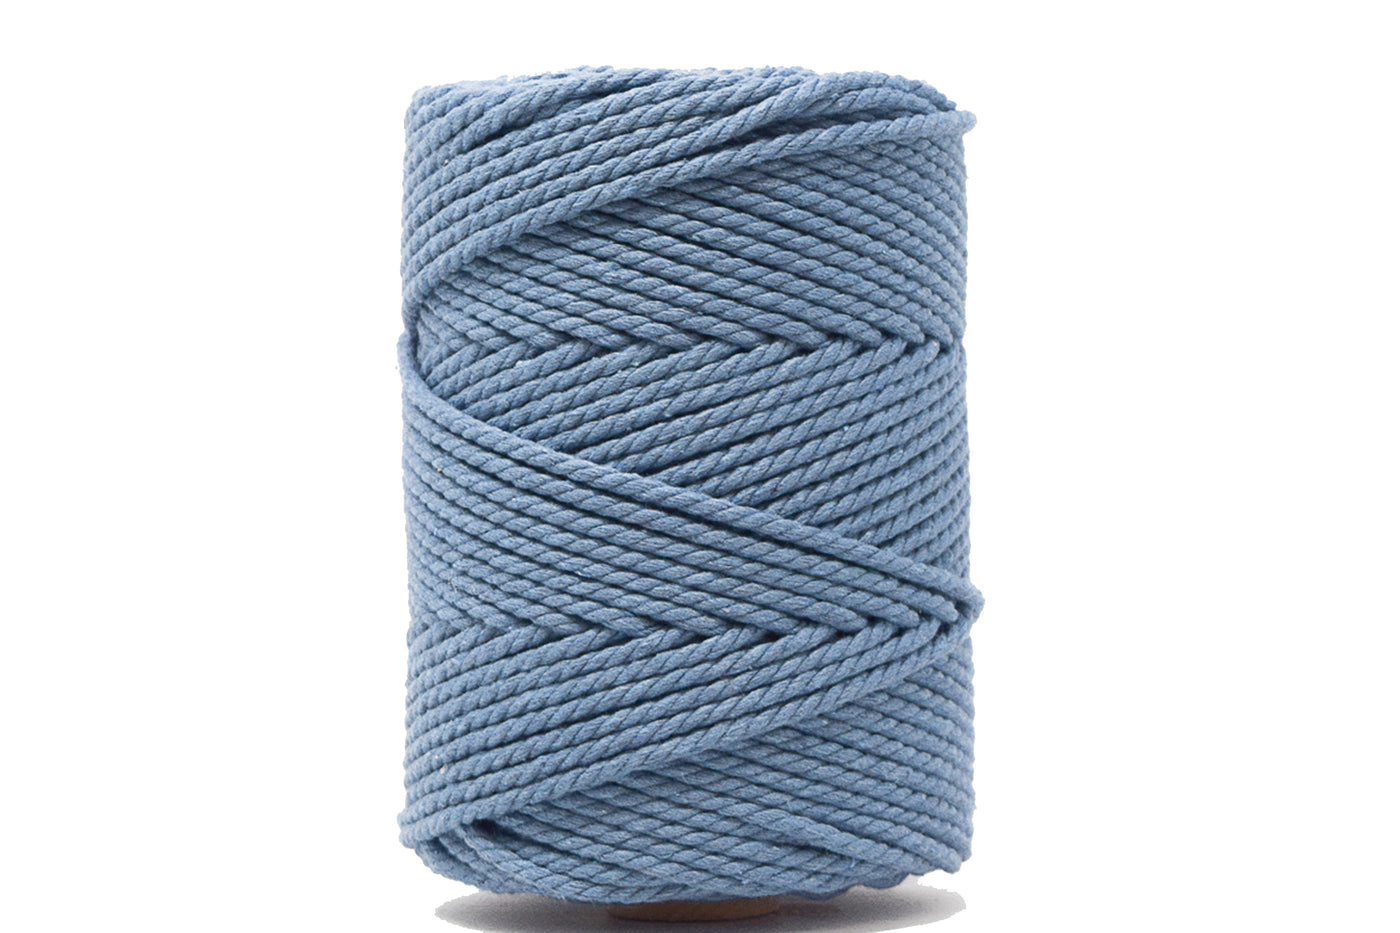 COTTON ROPE ZERO WASTE 3 MM - 3 PLY -BLUE JEANS COLOR